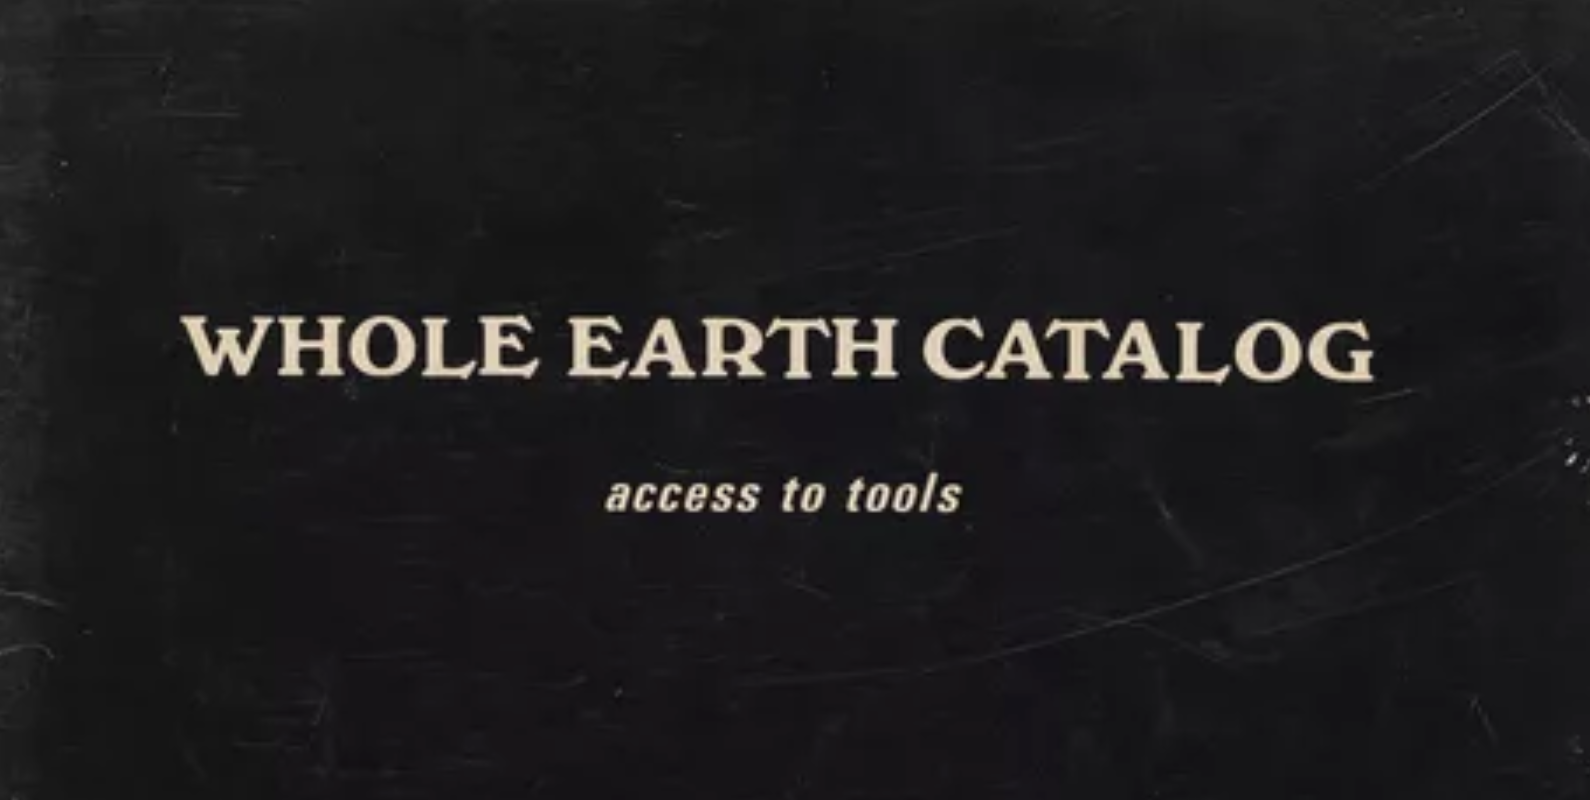 The WHOLE EARTH CATALOG (1969) embraced access to tools. Perhaps in the decades since, tools have also gotten access to us.